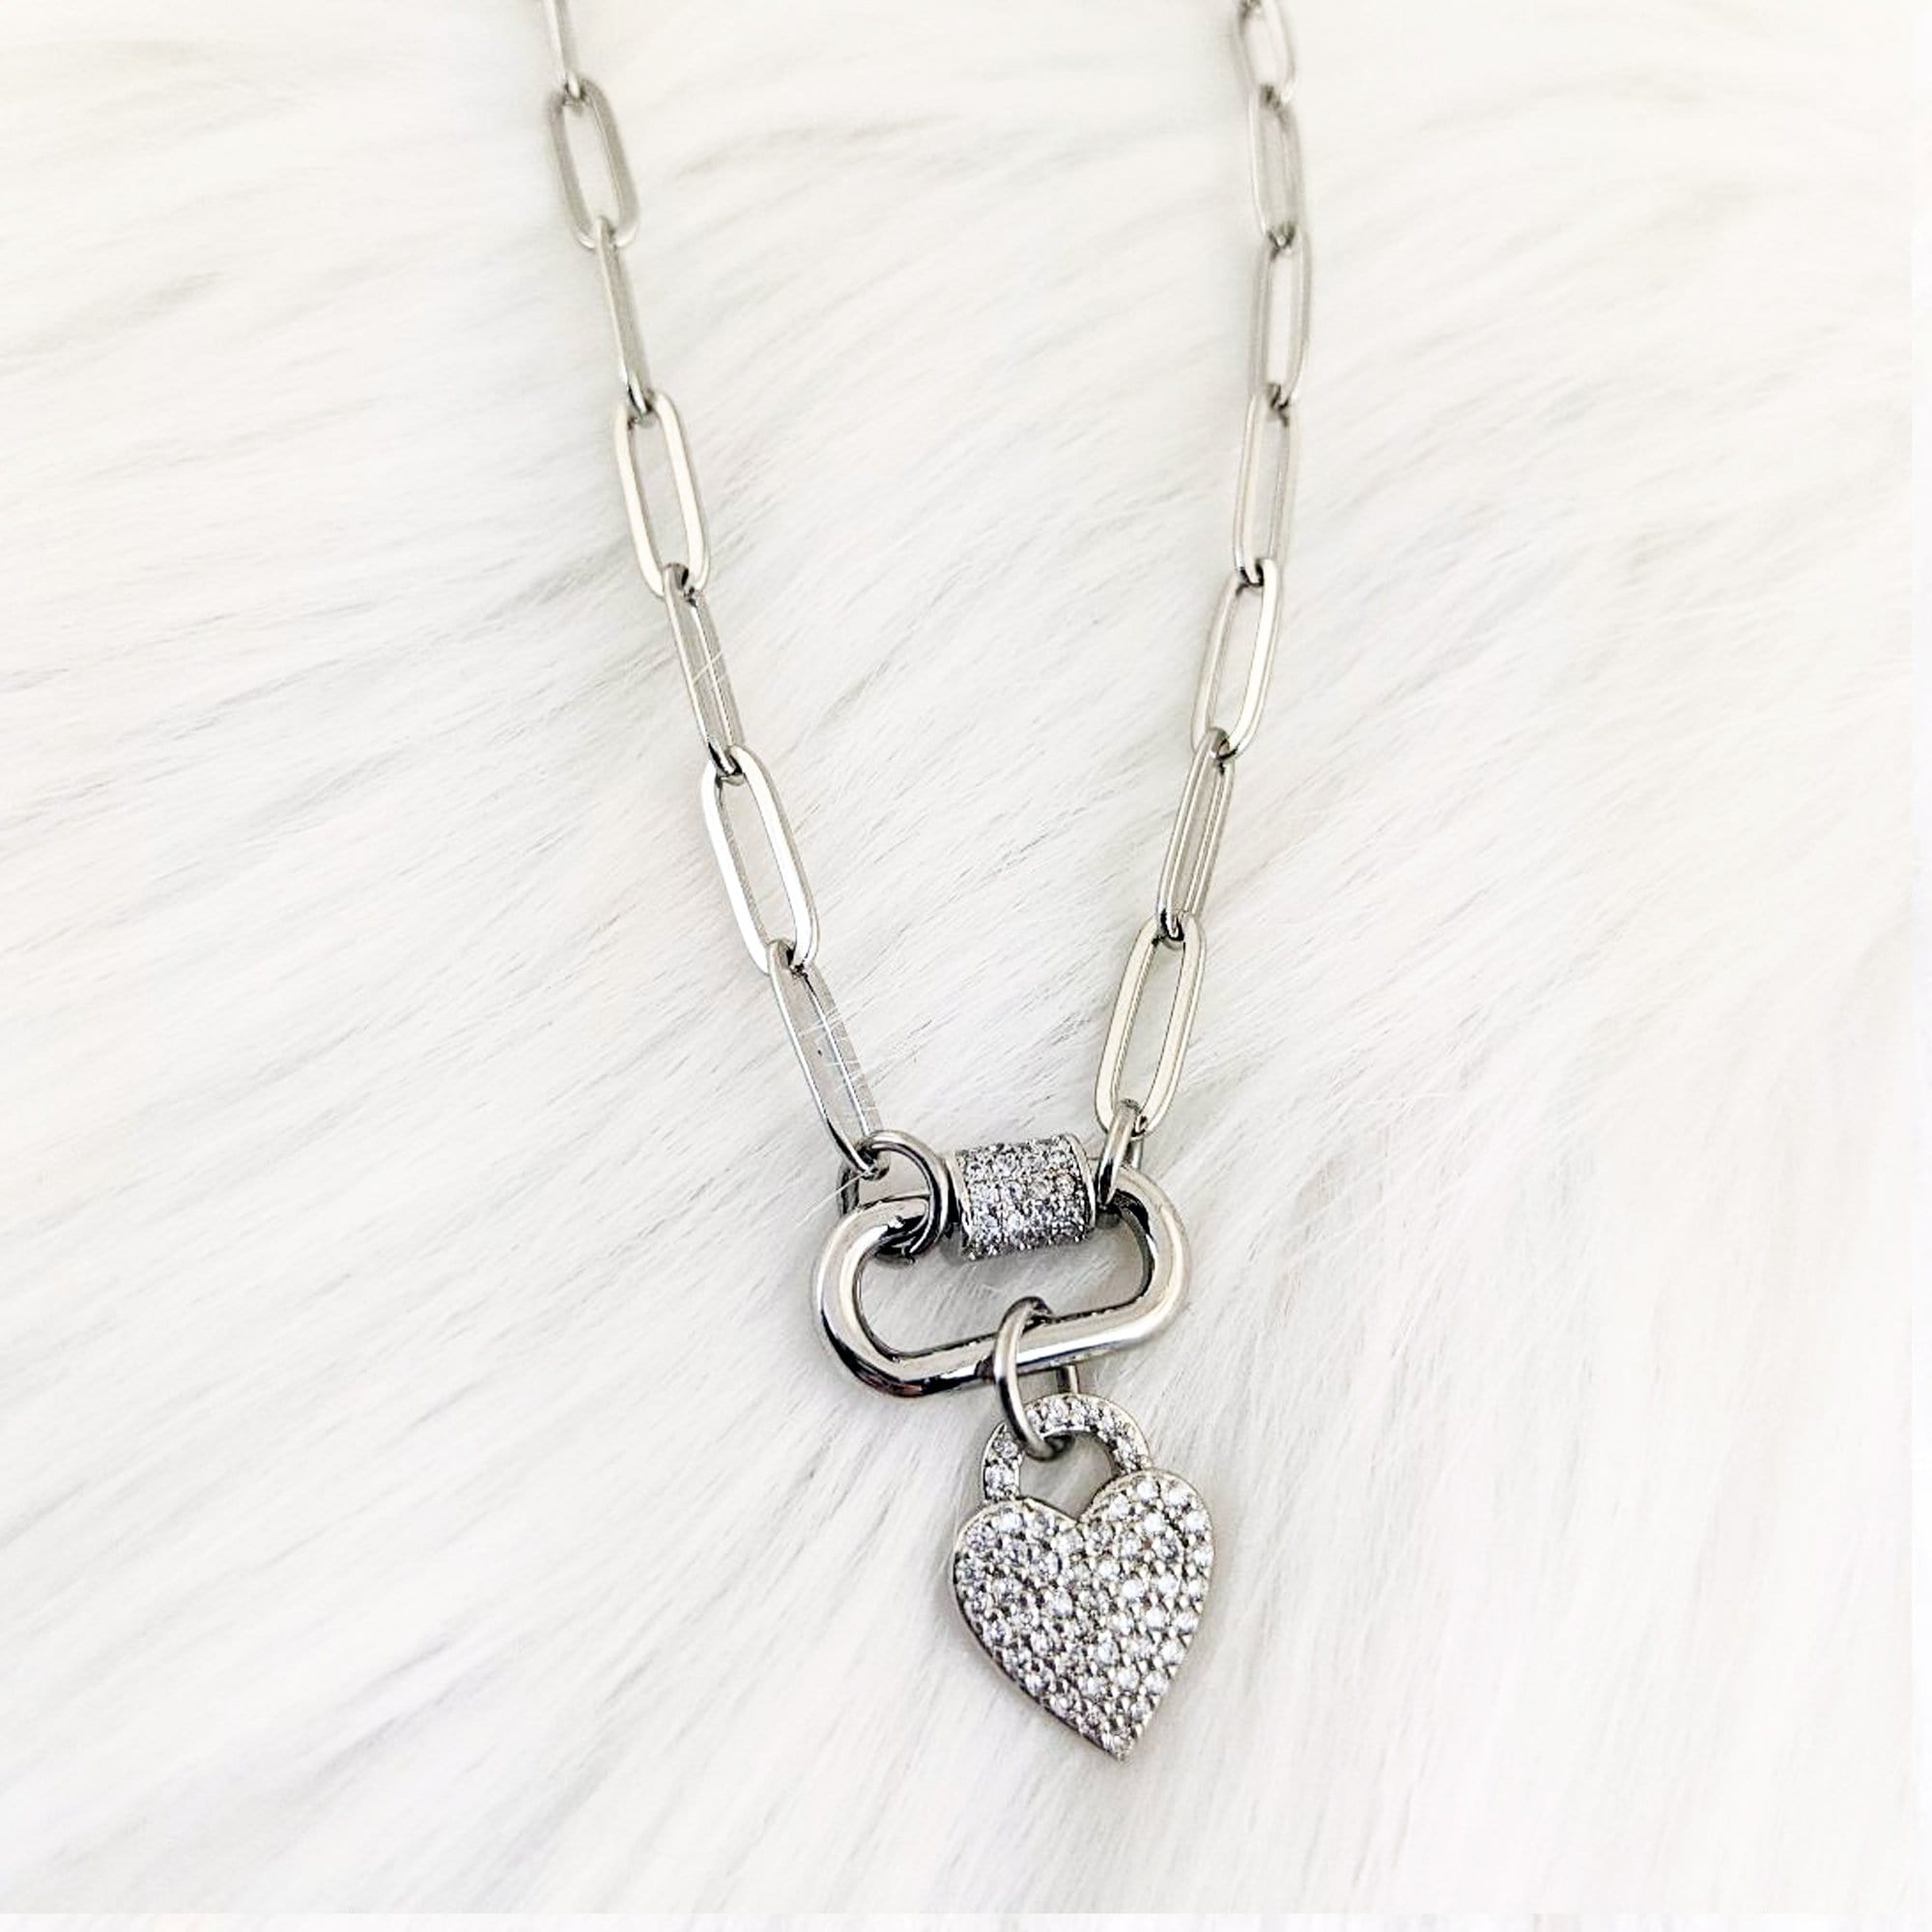 10K Gold Diamond Open Heart Necklace Kay Jewelers White Gold Twisted Rope  18 Chain Wedding Jewelry 14K Love FREE SHIPPING - Etsy